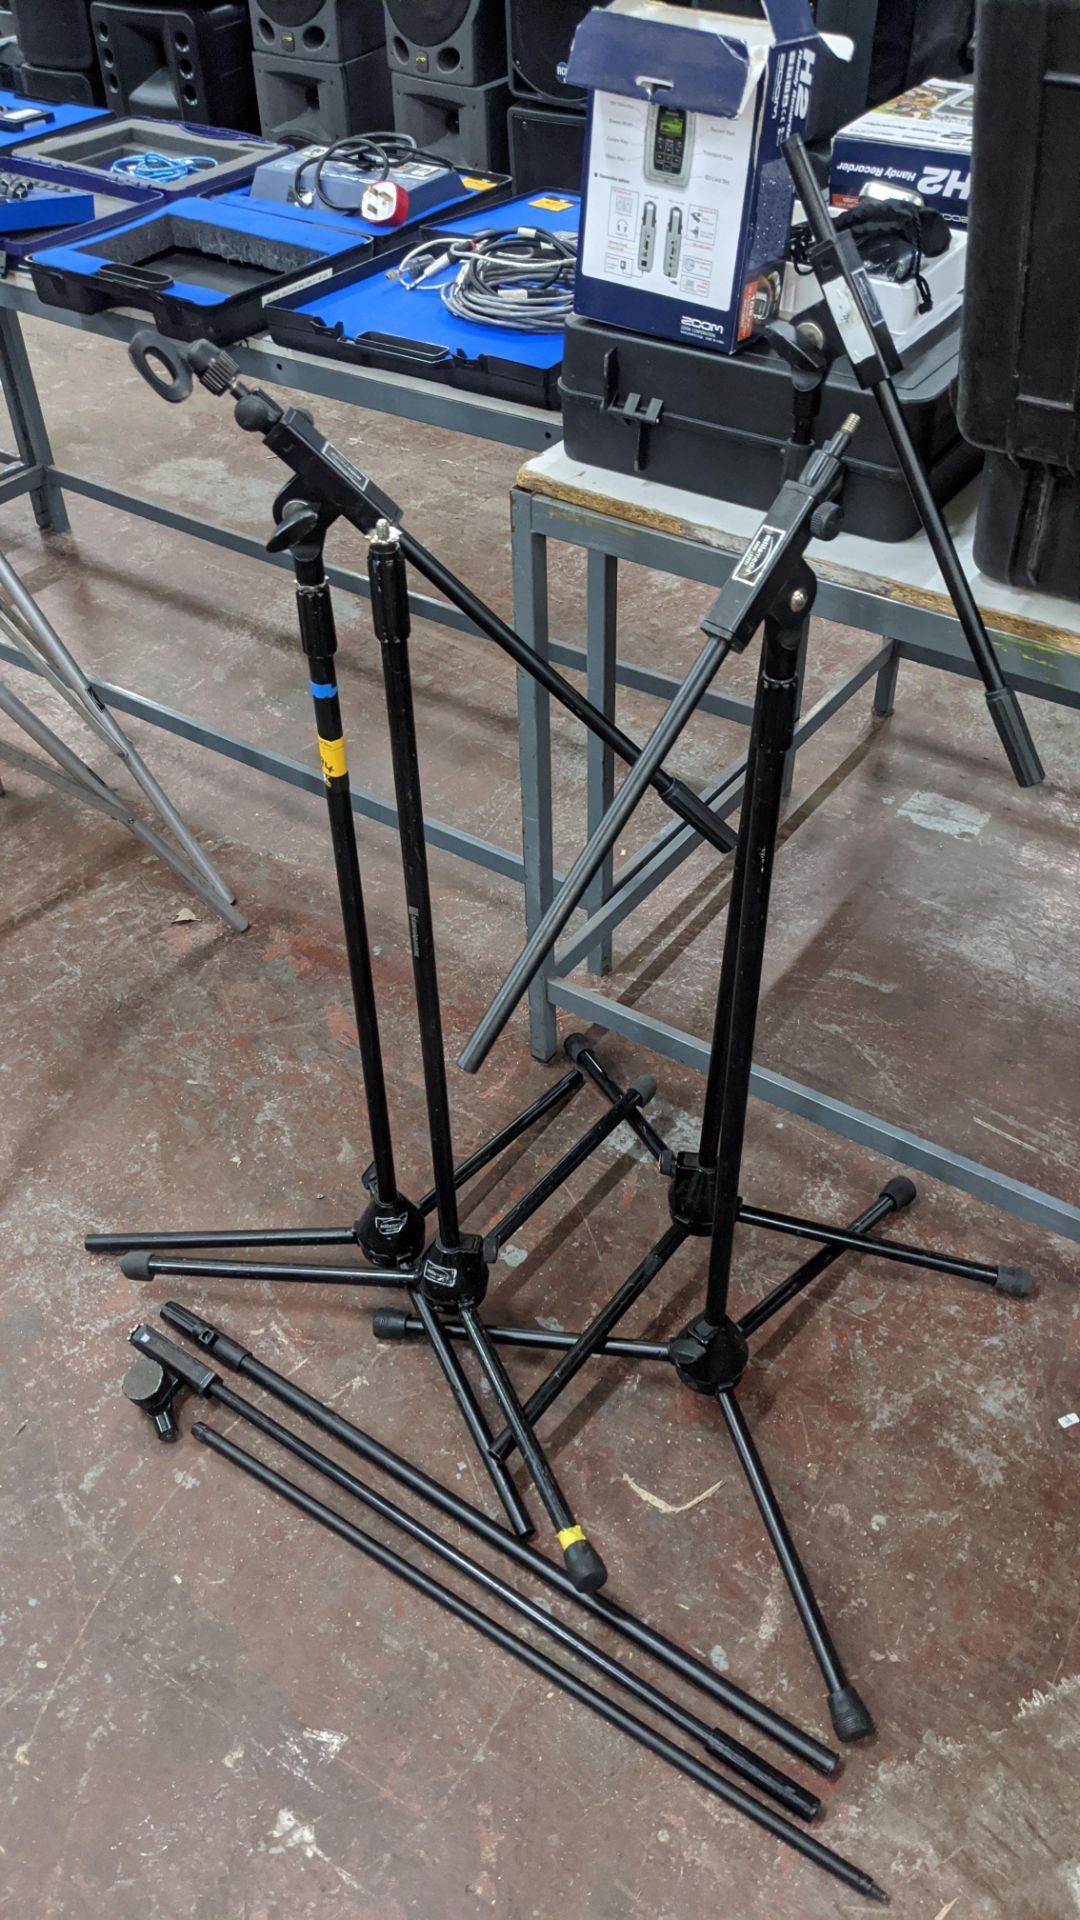 4 assorted audiovisual tripod stands plus 3 extension pieces for use with same Lots 51 - 480 - Image 3 of 3